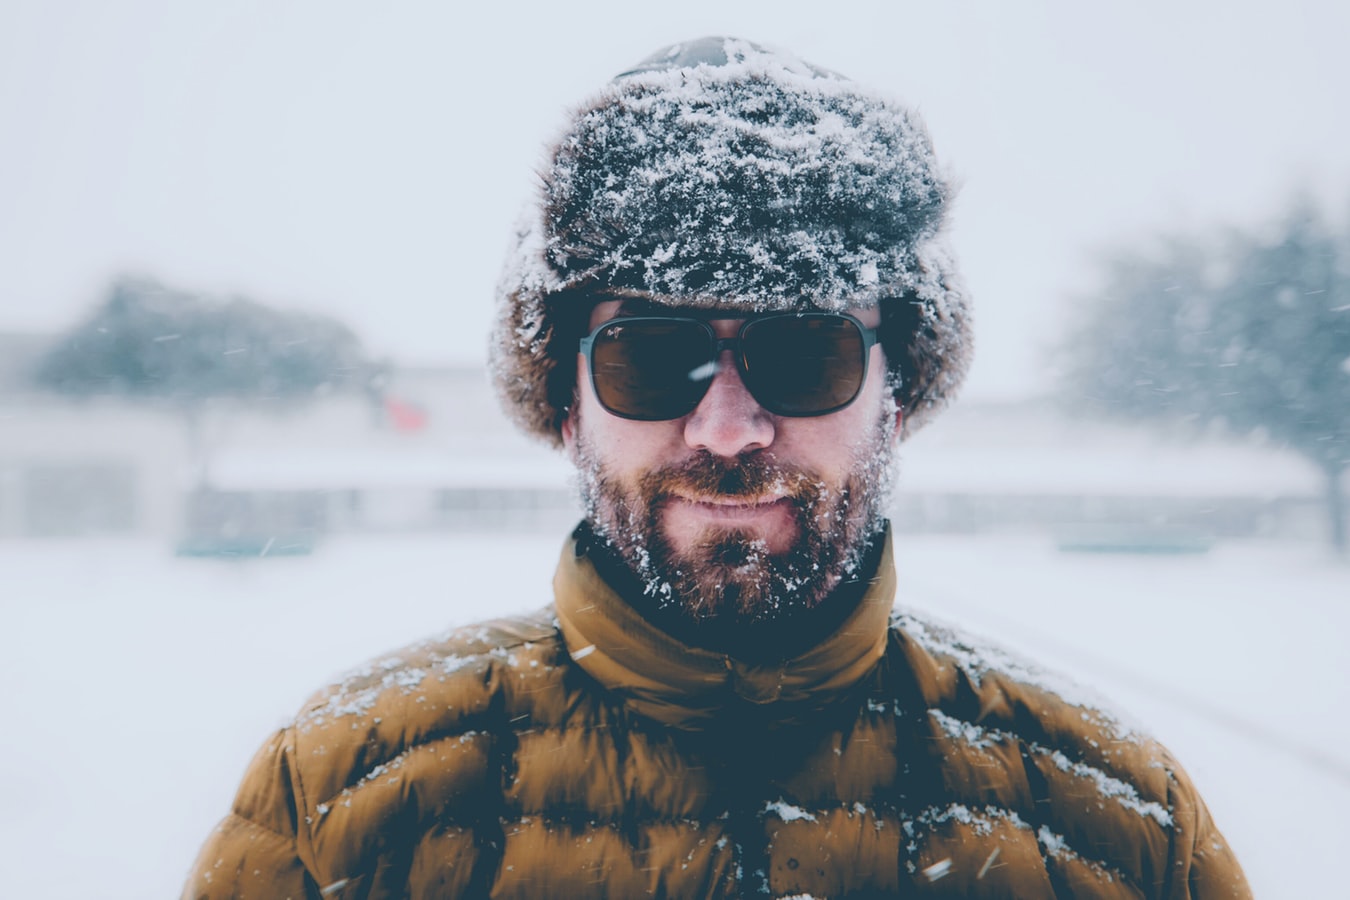 The Top 5 Sunglasses for the Snow